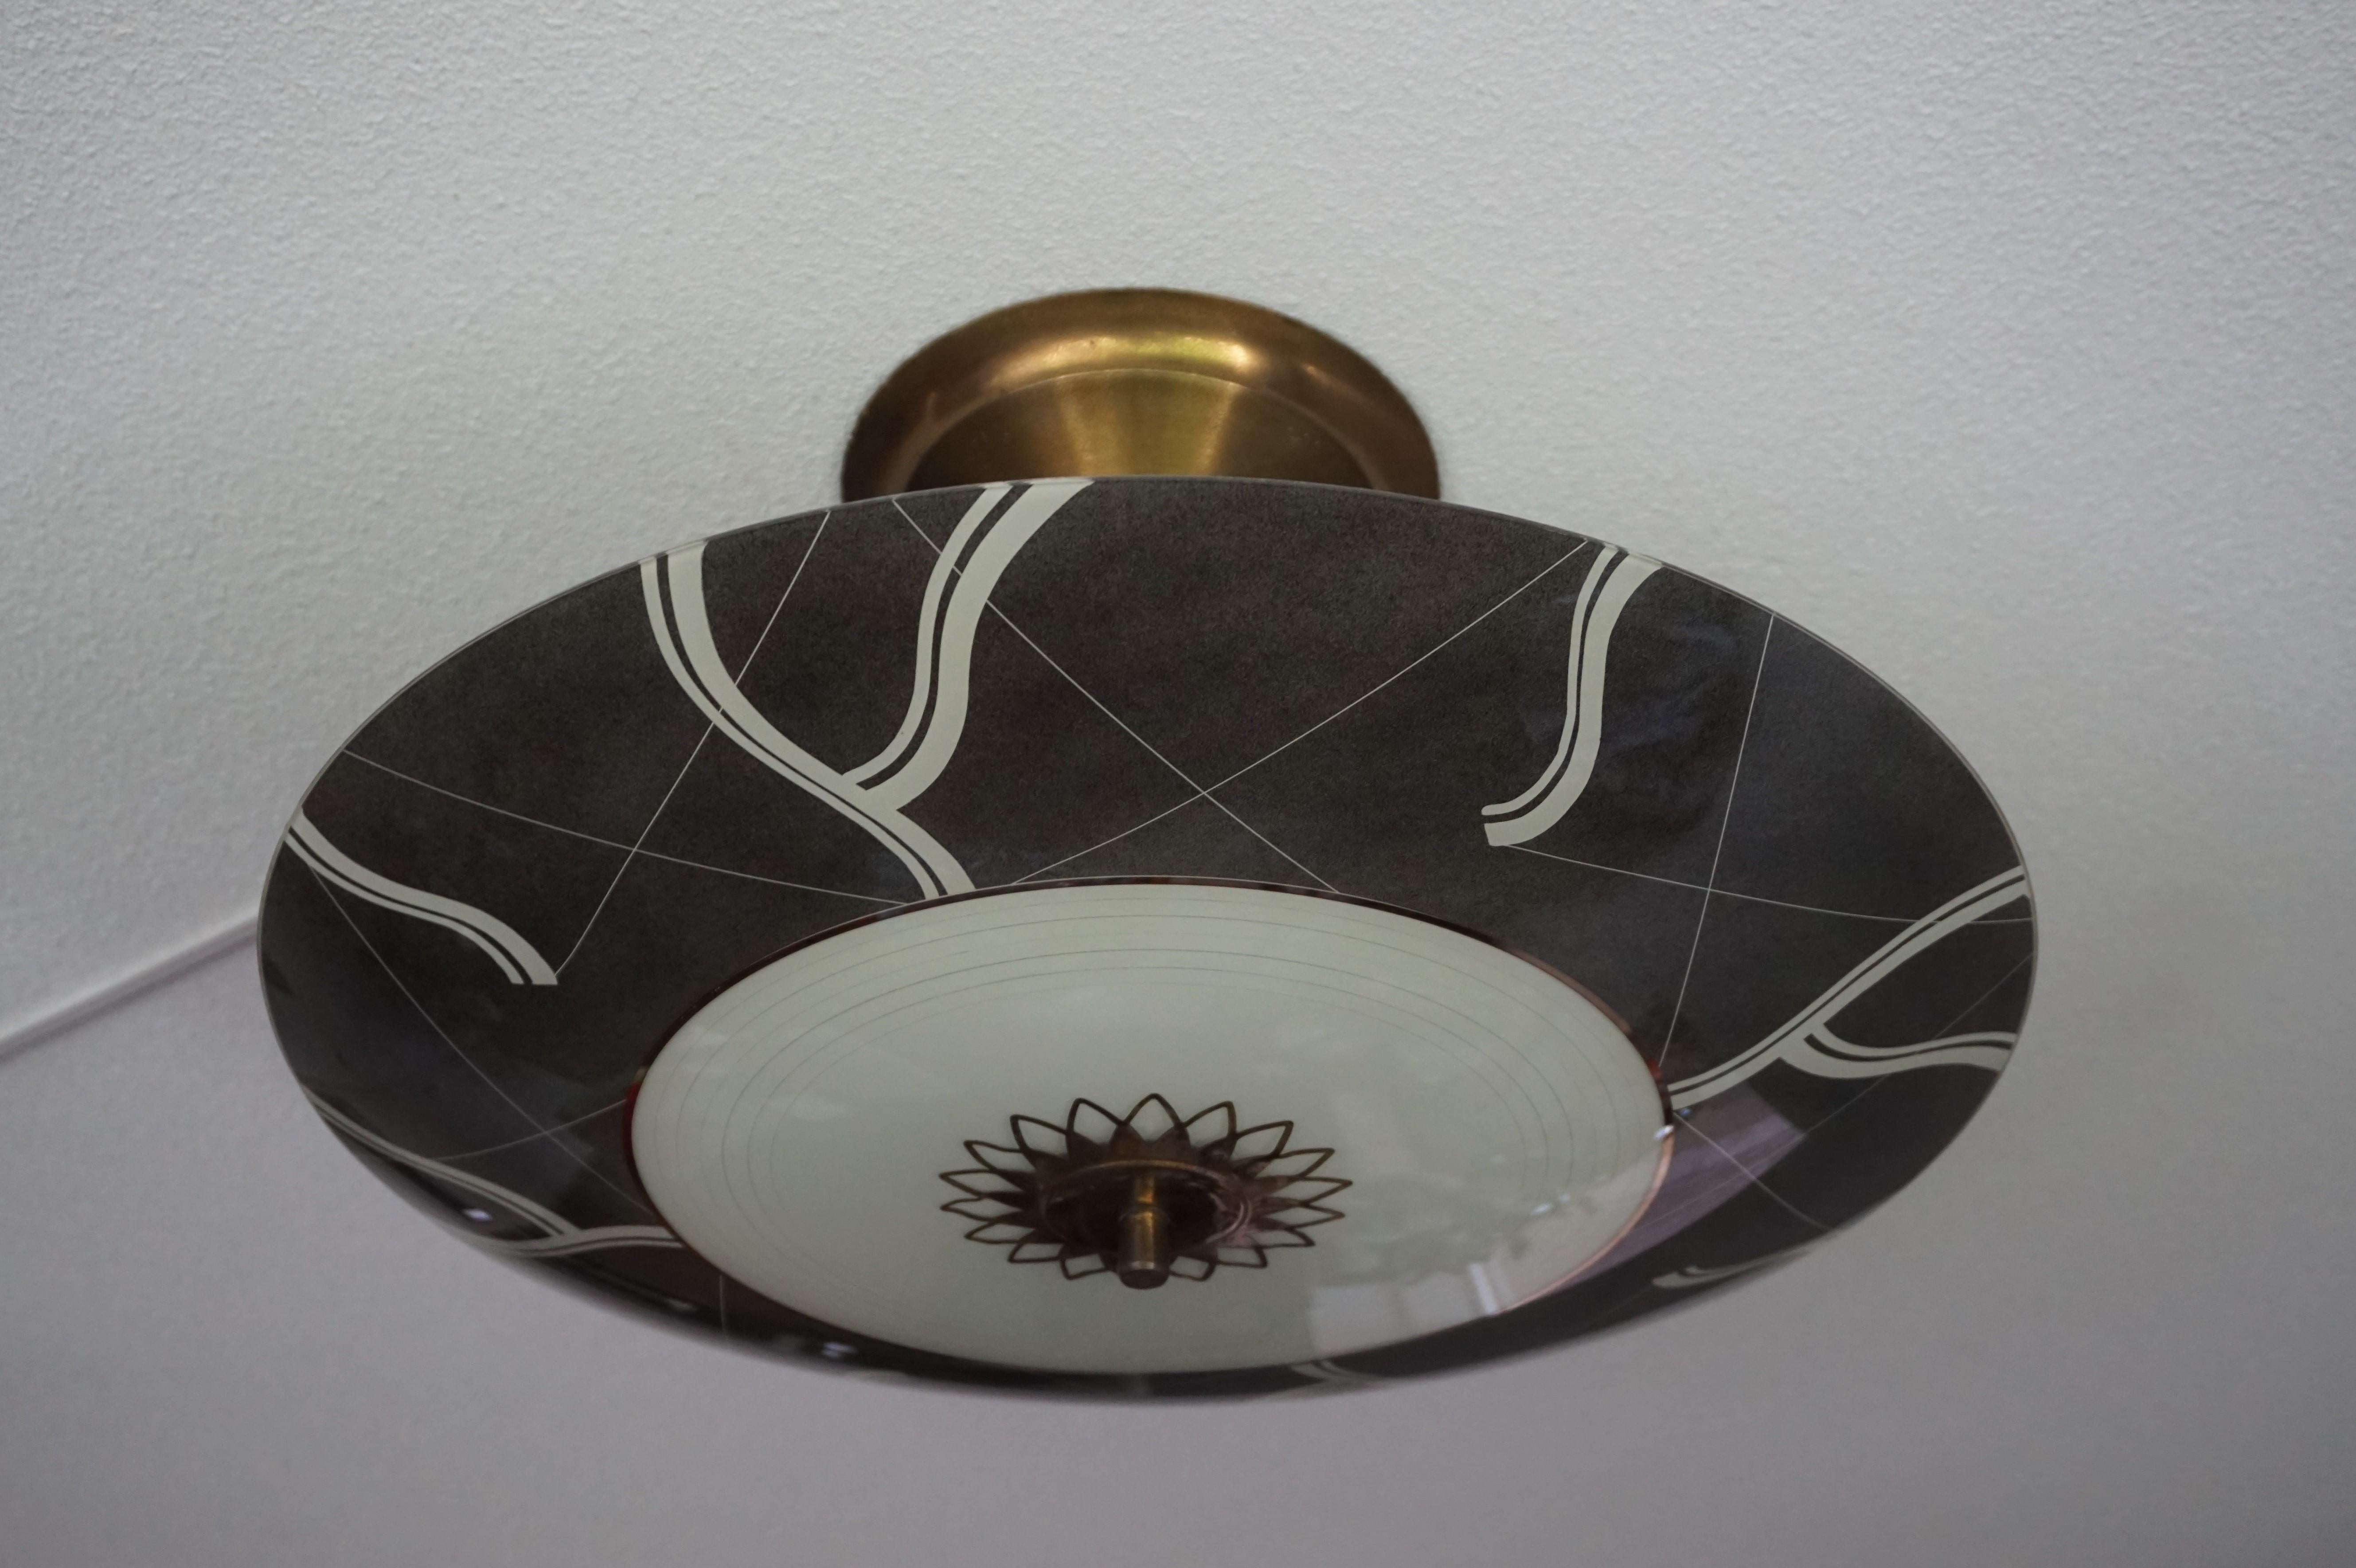 Rare and great looking, three light midcentury flush mount.

This midcentury light fixture with the unique 'eye ball' pattern is another one of our recent great finds. Both with the light switched on and off this Fine work of lighting art from the